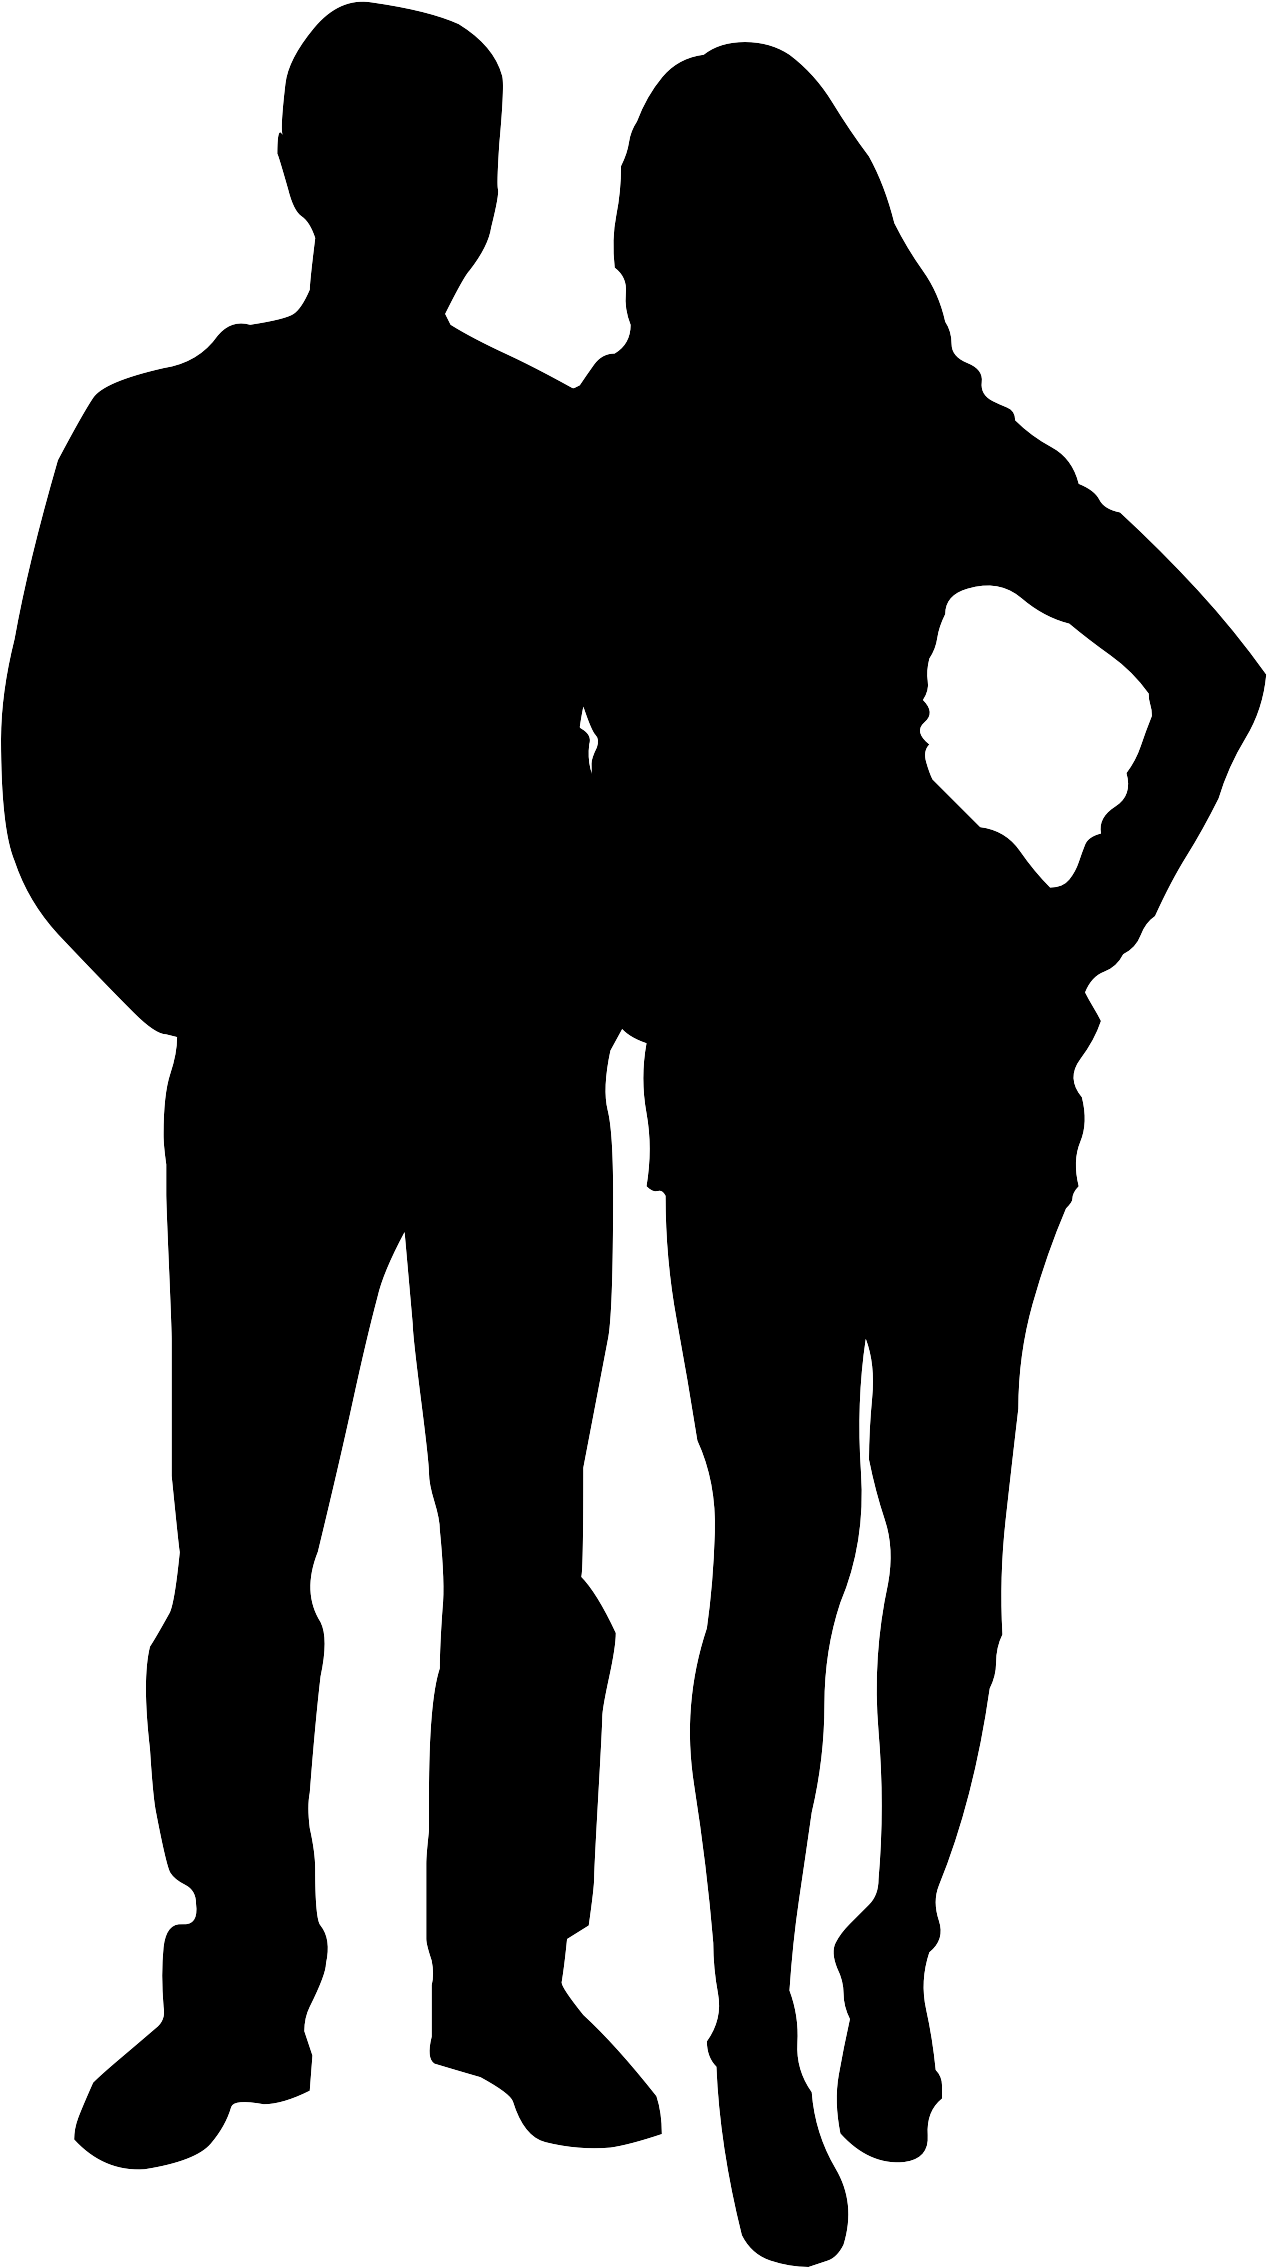 Wedding, Couple, Silhouette, Love, Relationship - Man And Woman Silhouette Png (1365x2370)